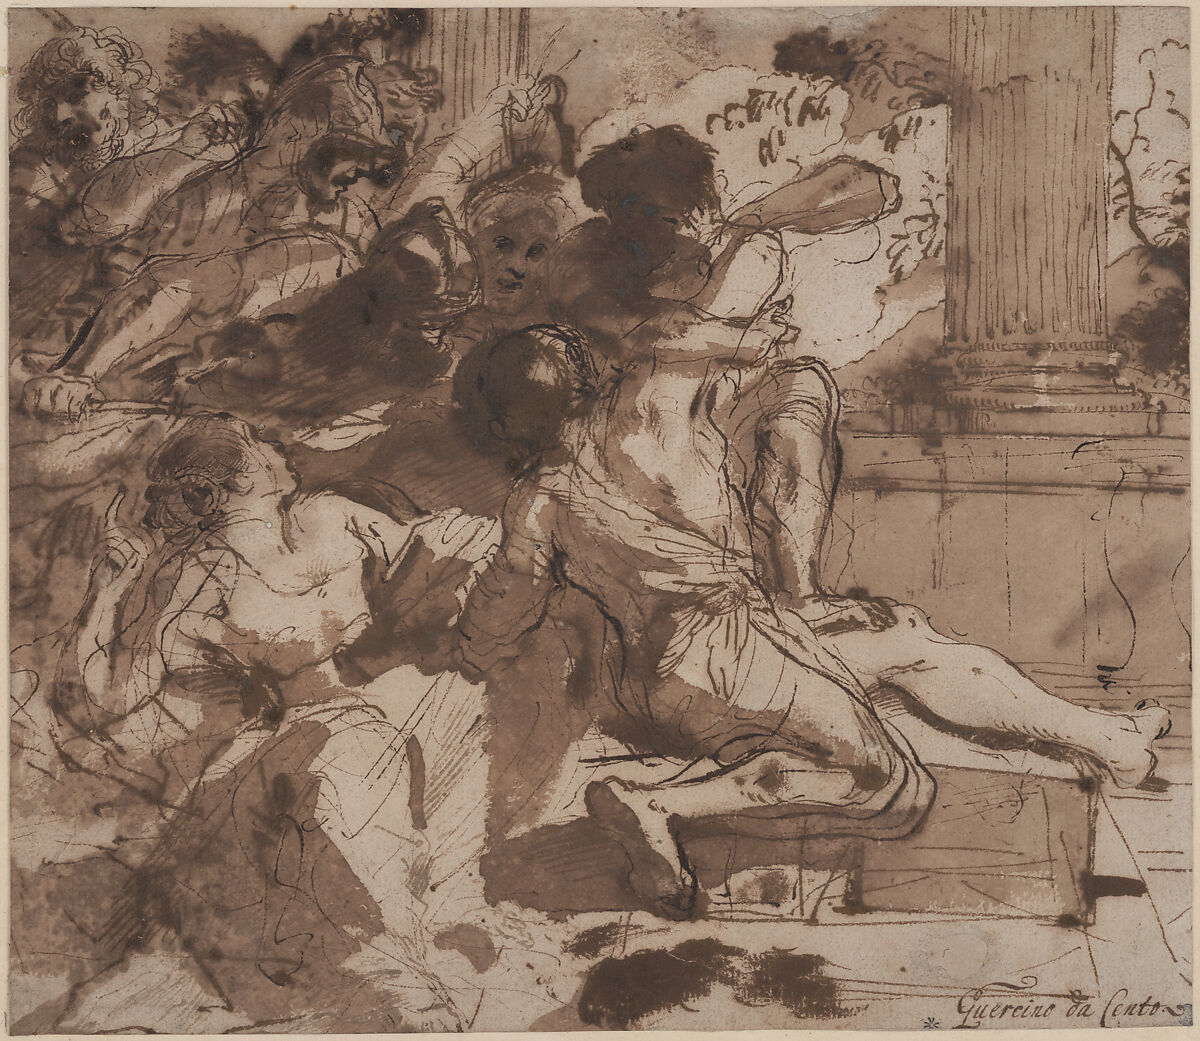 Samson Captured by the Philistines, Guercino (Giovanni Francesco Barbieri) (Italian, Cento 1591–1666 Bologna), Pen and dark brown (iron gall) ink with brush and two hues of brown wash 